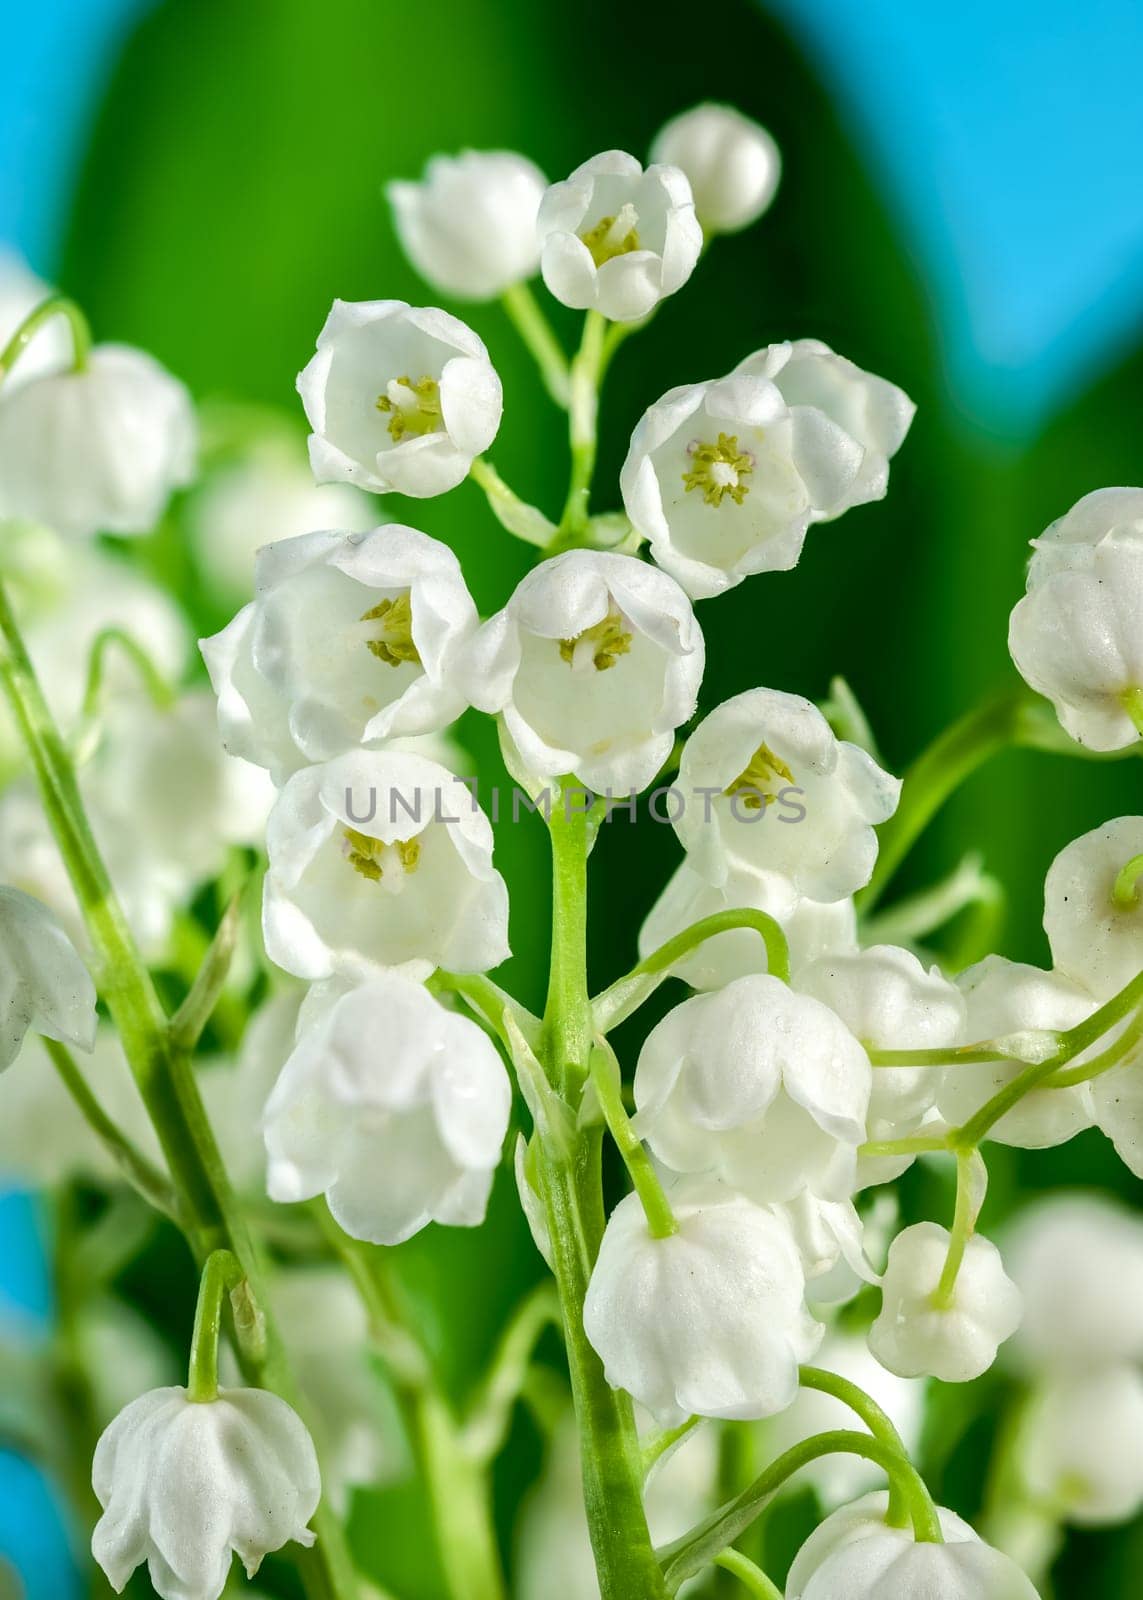 Beautiful blooming white Lily of the valley flower isolated on a blue background. Flower head close-up.